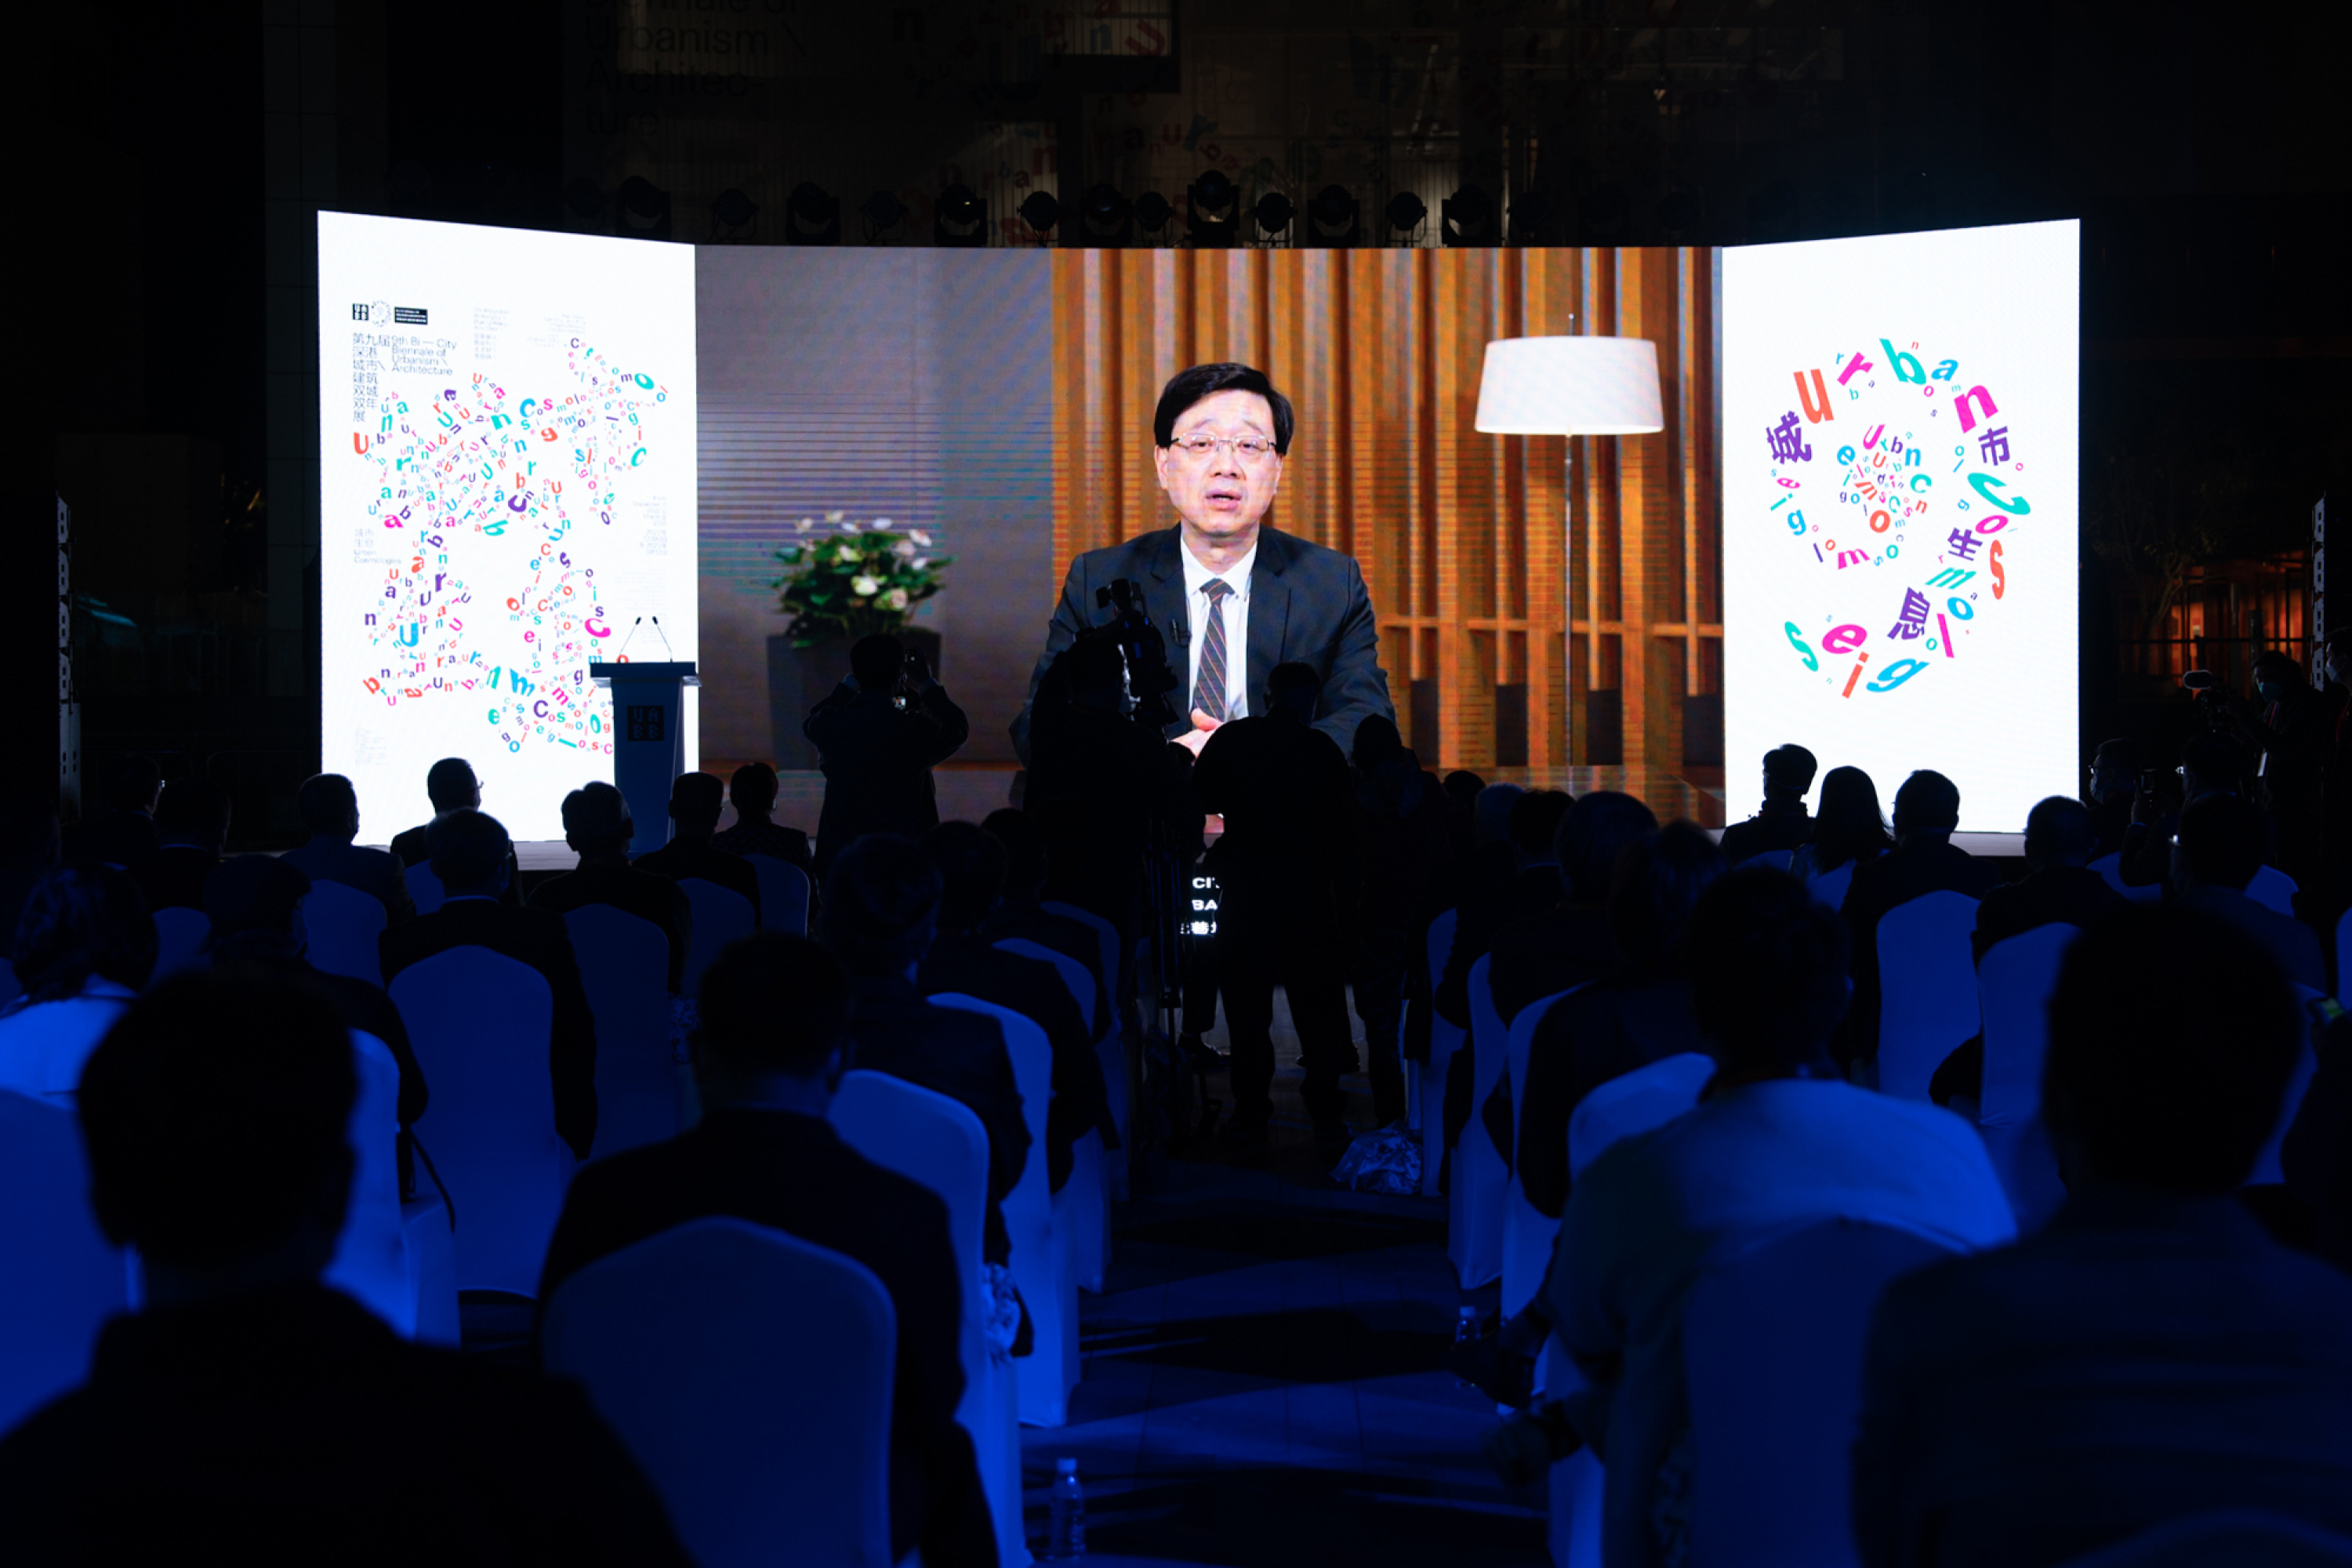 The 9th Bi-City Biennale of Urbanism/Architecture (Shenzhen) Opened, with the Participation of Hong Kong Chief Executive Mr. Jiachao Li and Shenzhen Mayor Mr. Weizhong Qin at the Launch Ceremony